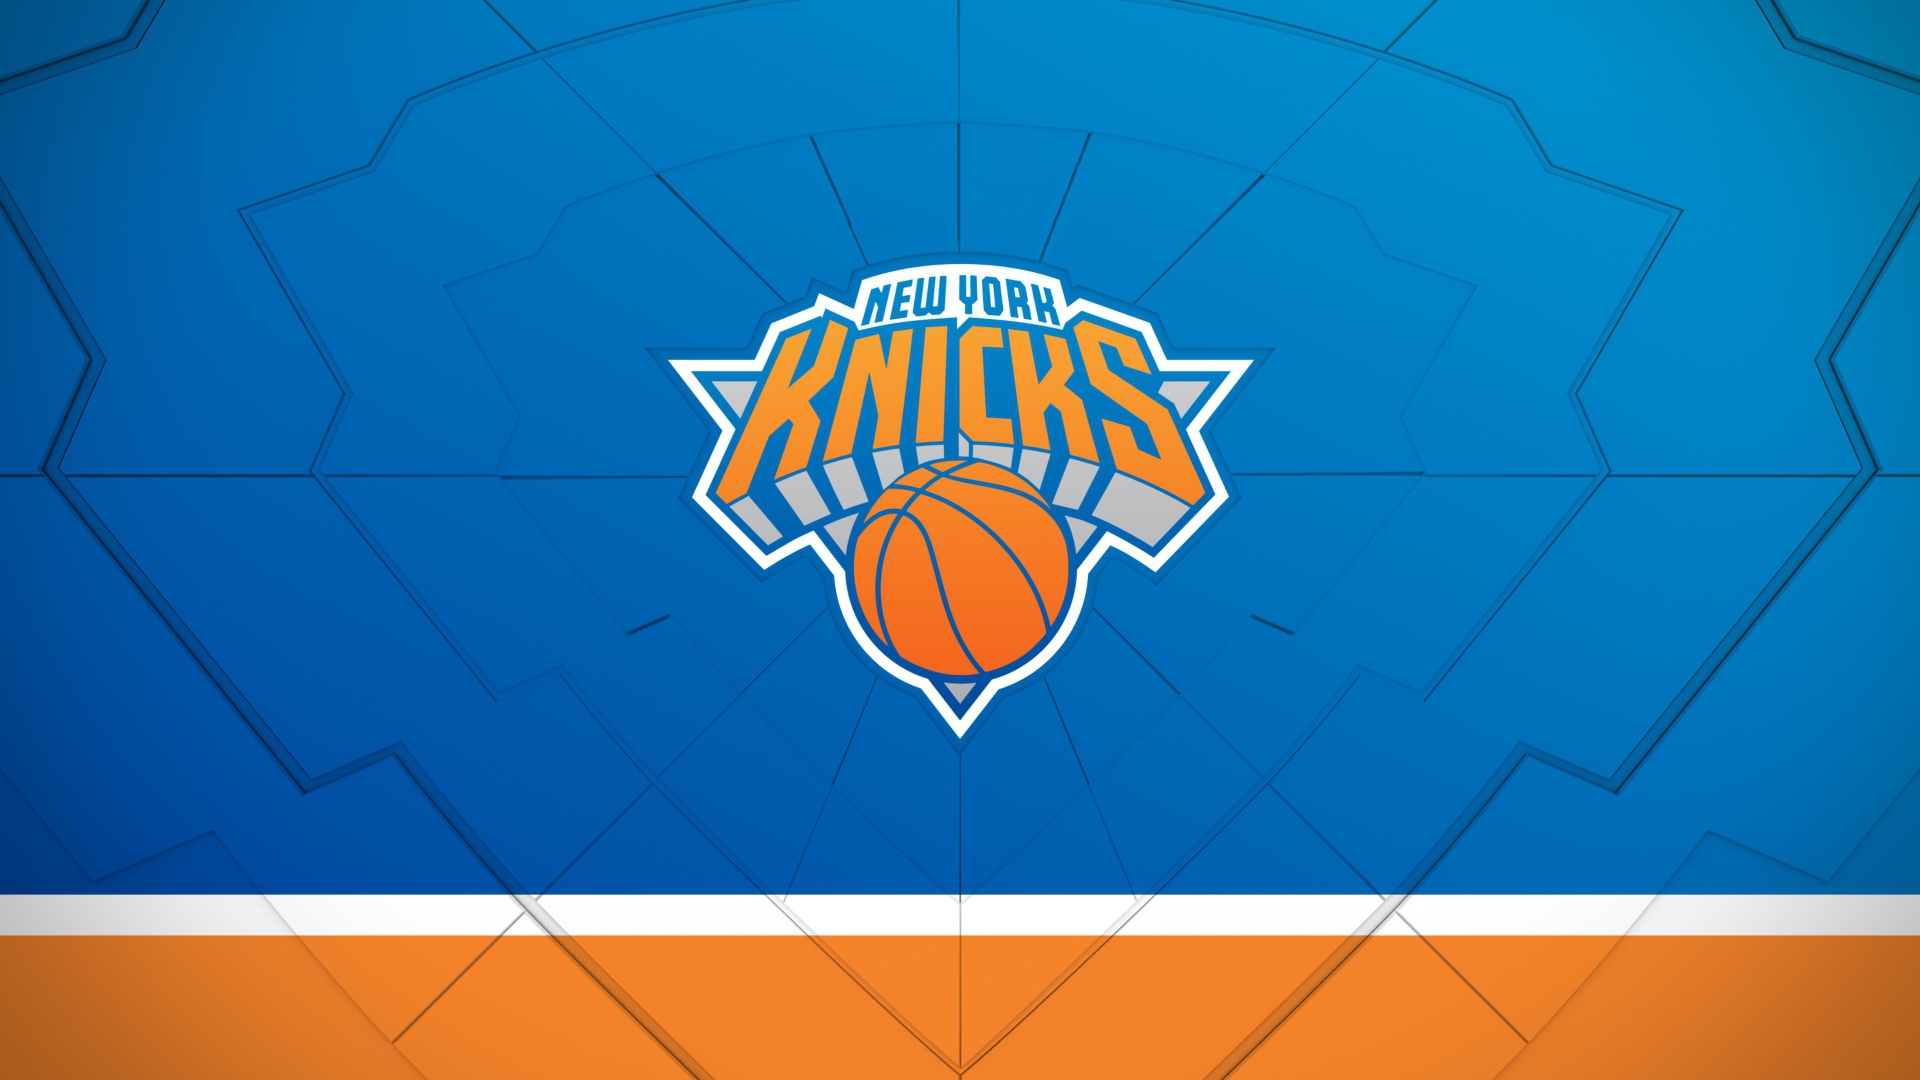 Westchester Knicks Wallpaper Image Photos Pictures Background